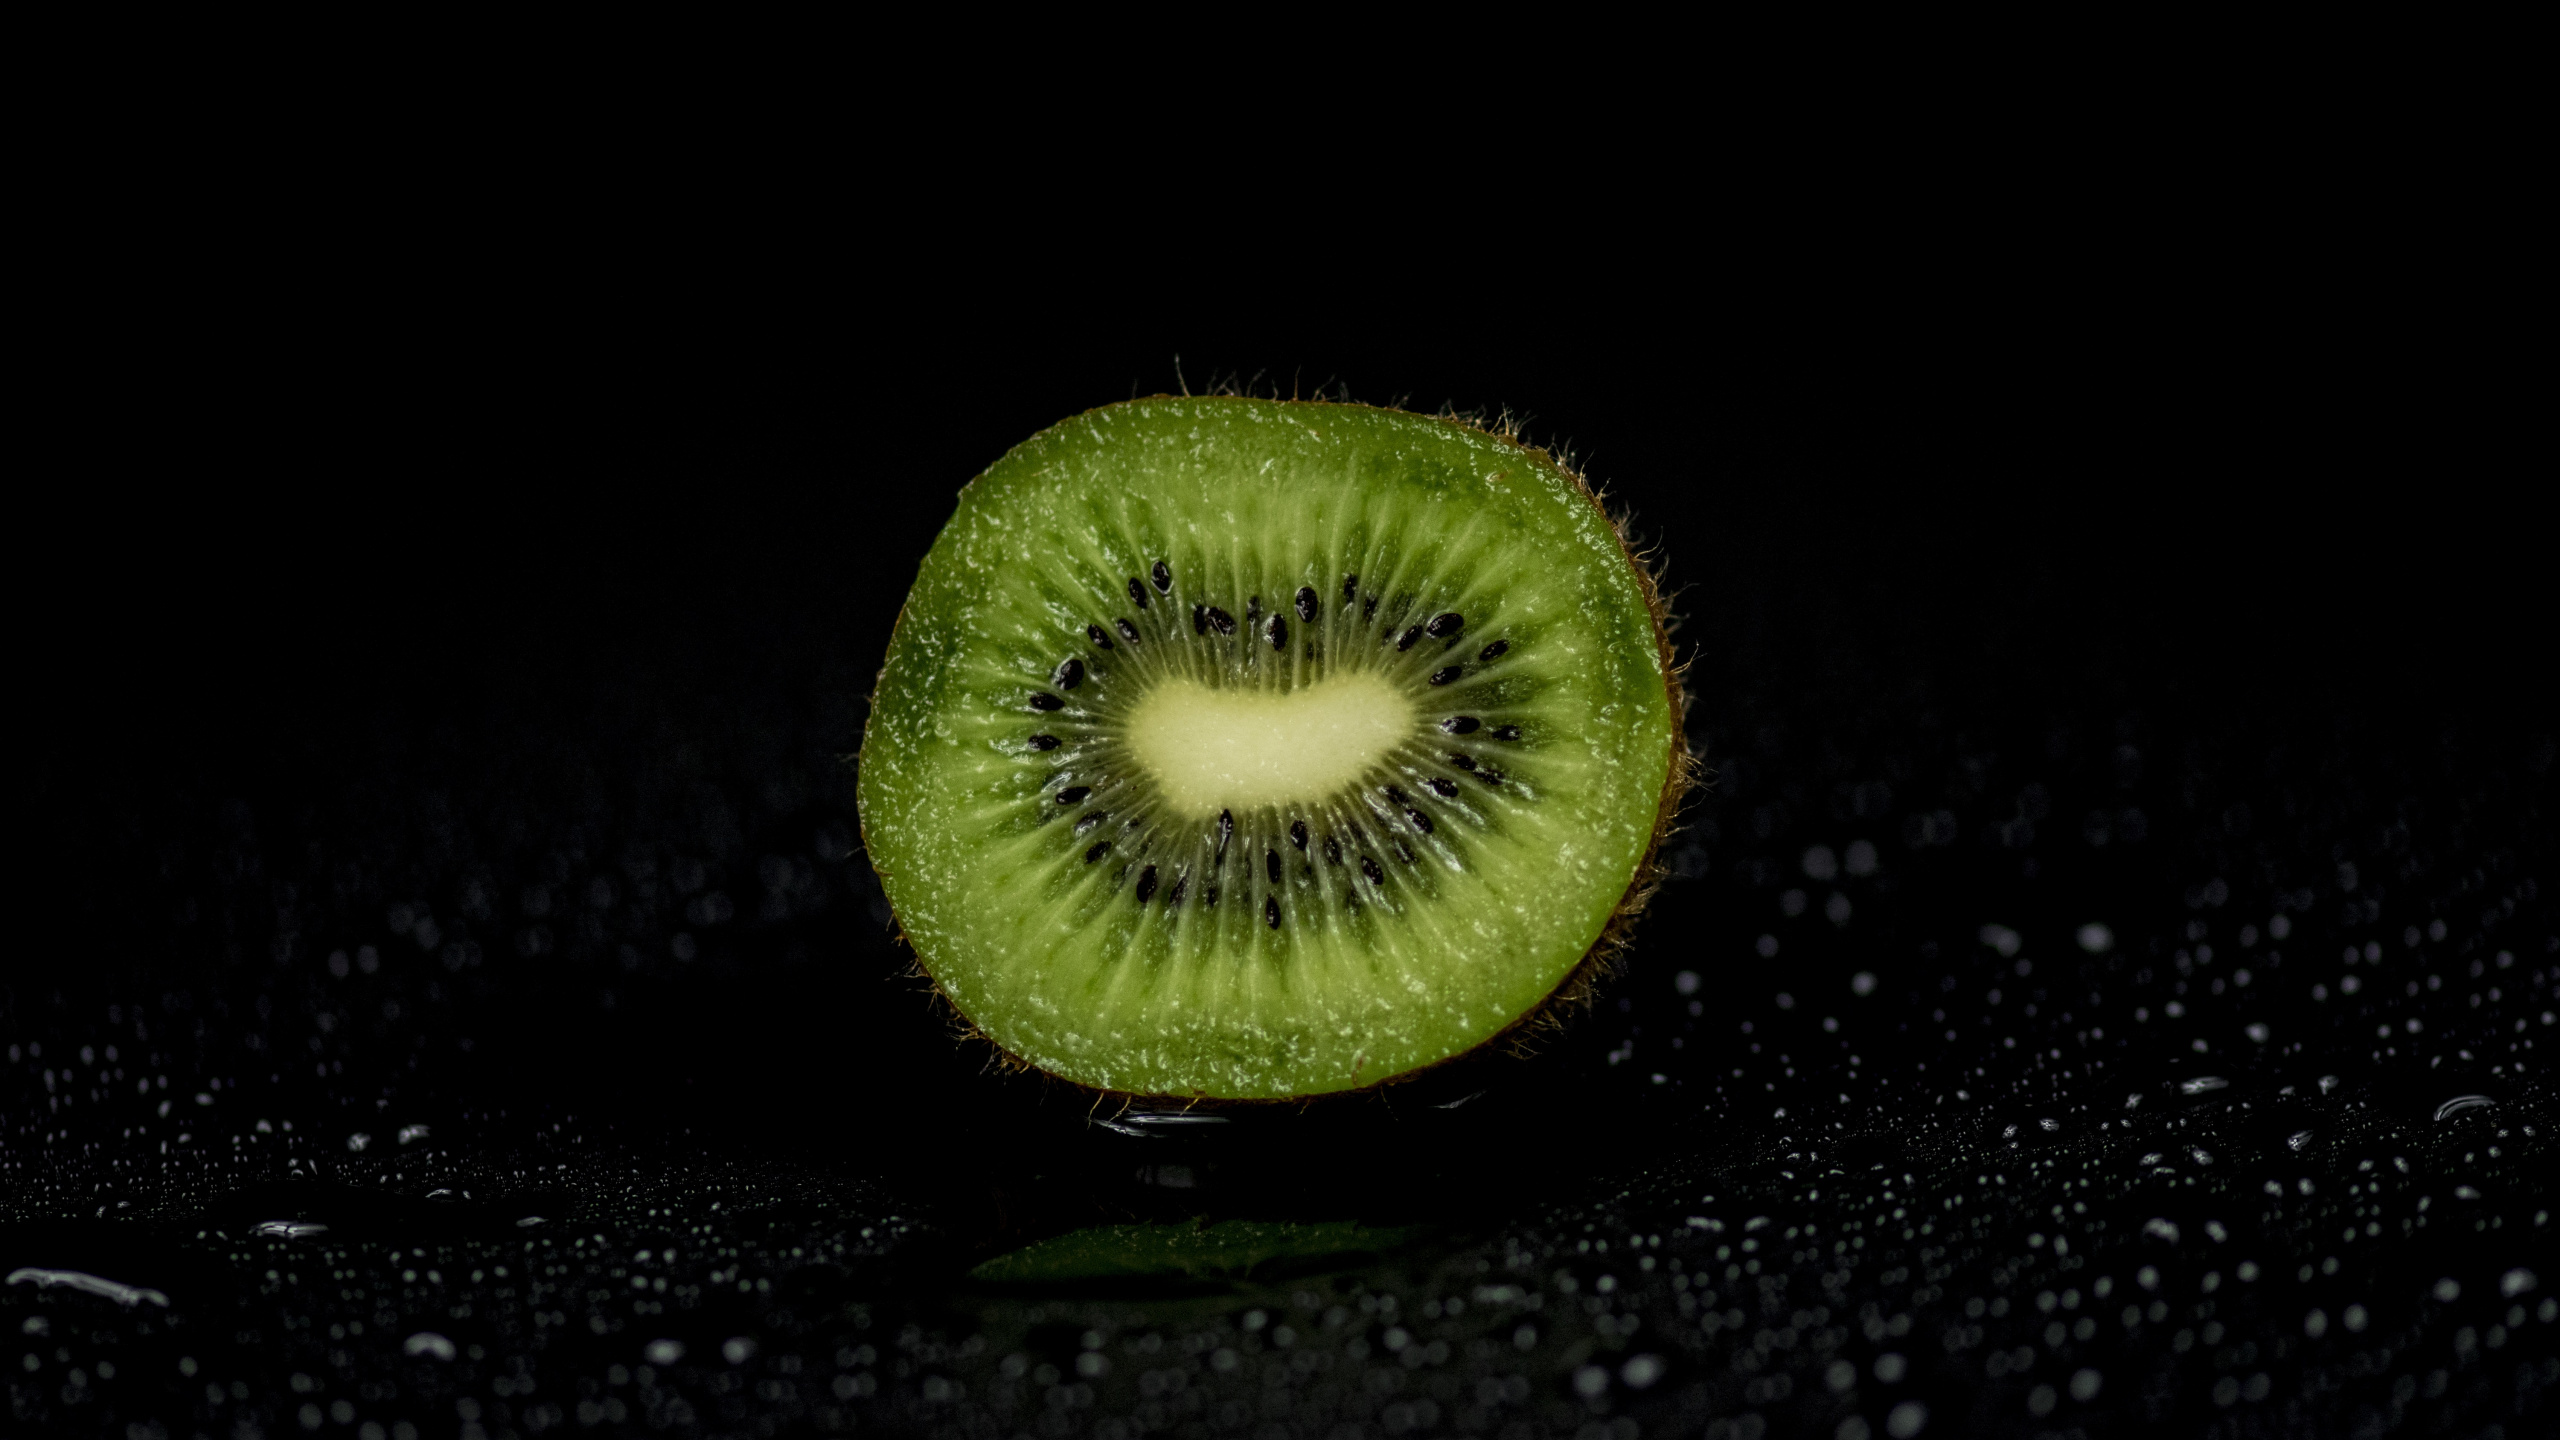 Green Round Fruit on Black Surface. Wallpaper in 2560x1440 Resolution